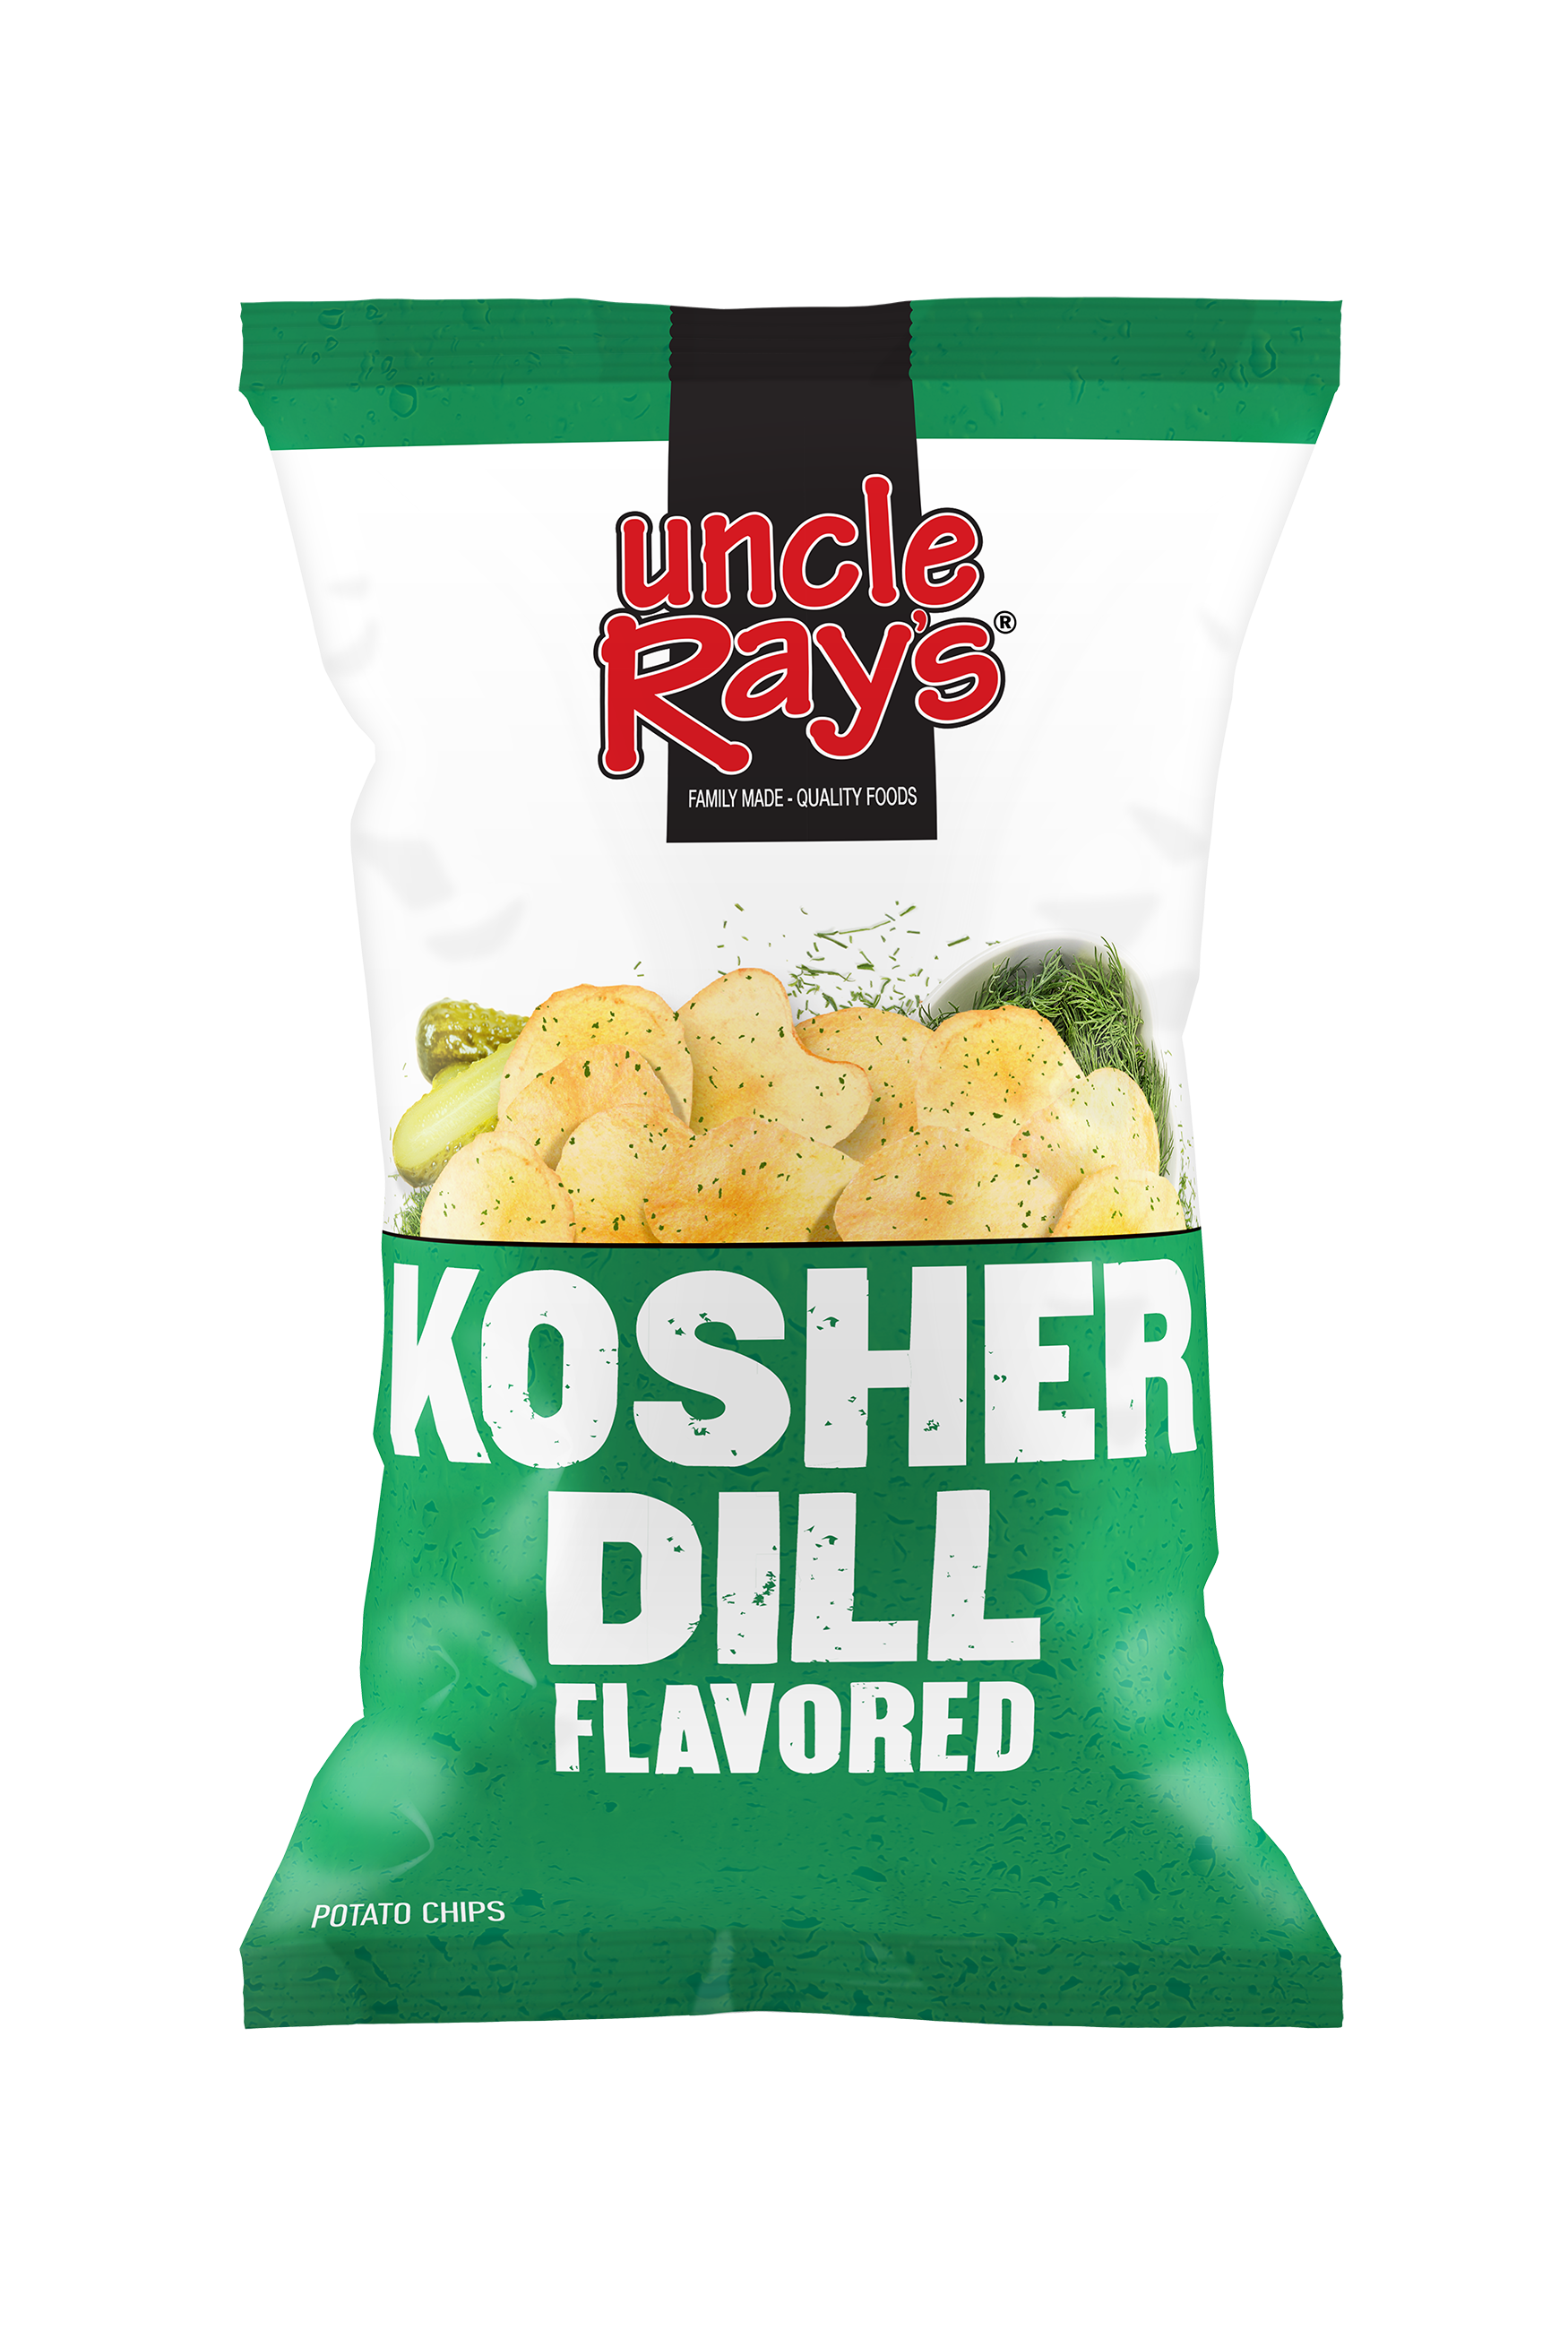 Uncle rays kosher dill chips 3oz